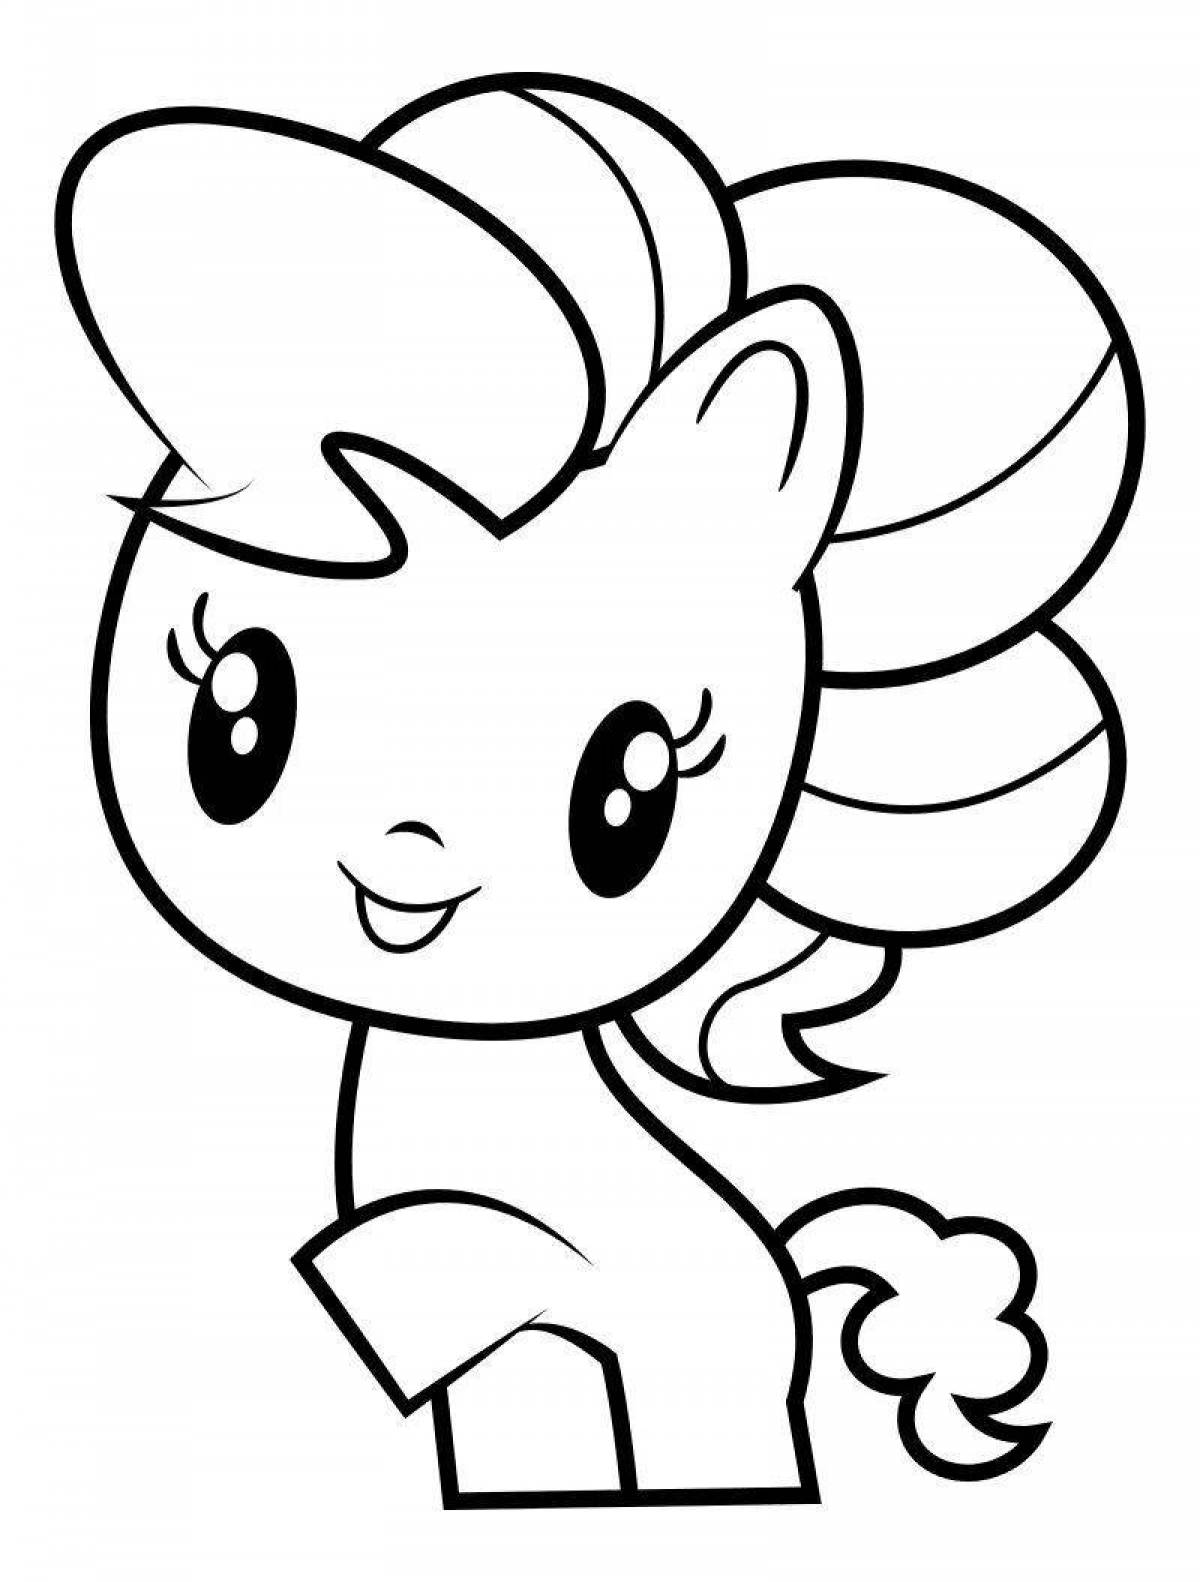 Adorable pony coloring book for kids